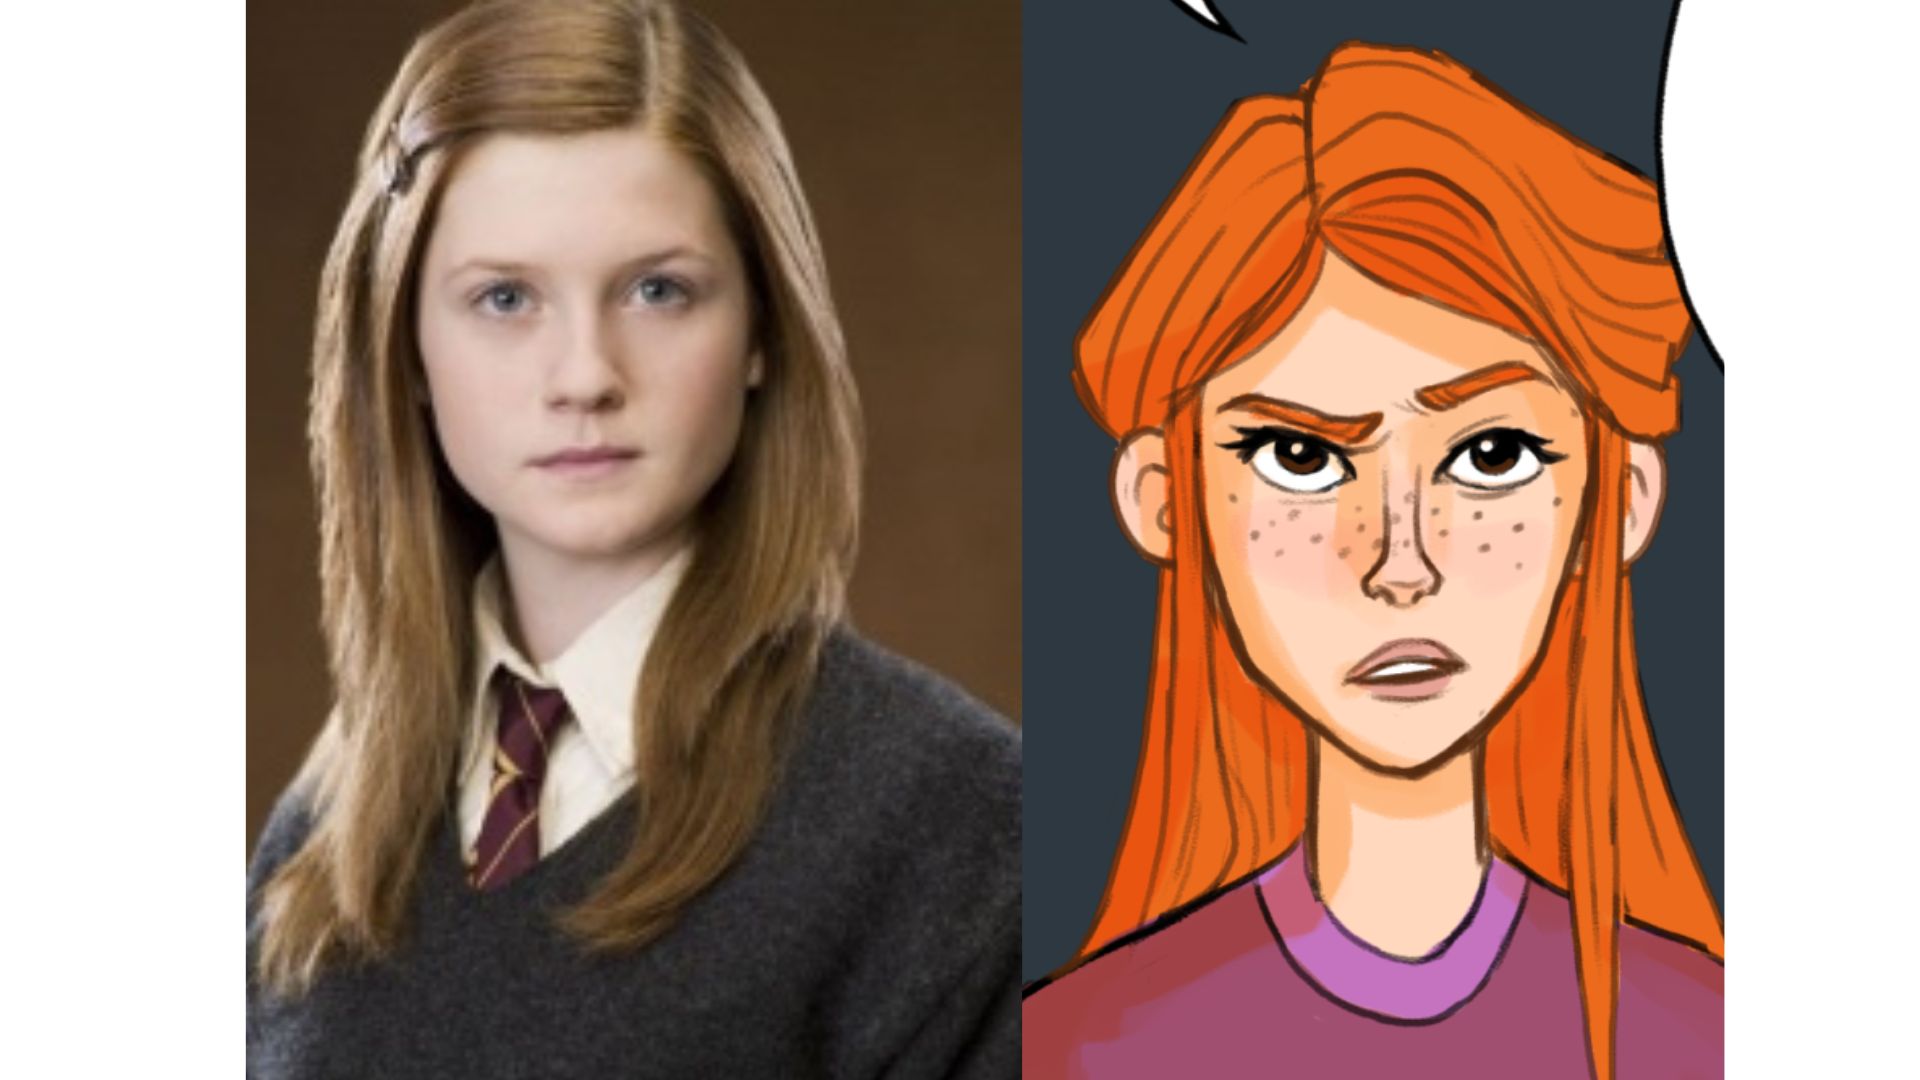 ali ketley share pictures of ginny weasley from harry potter photos